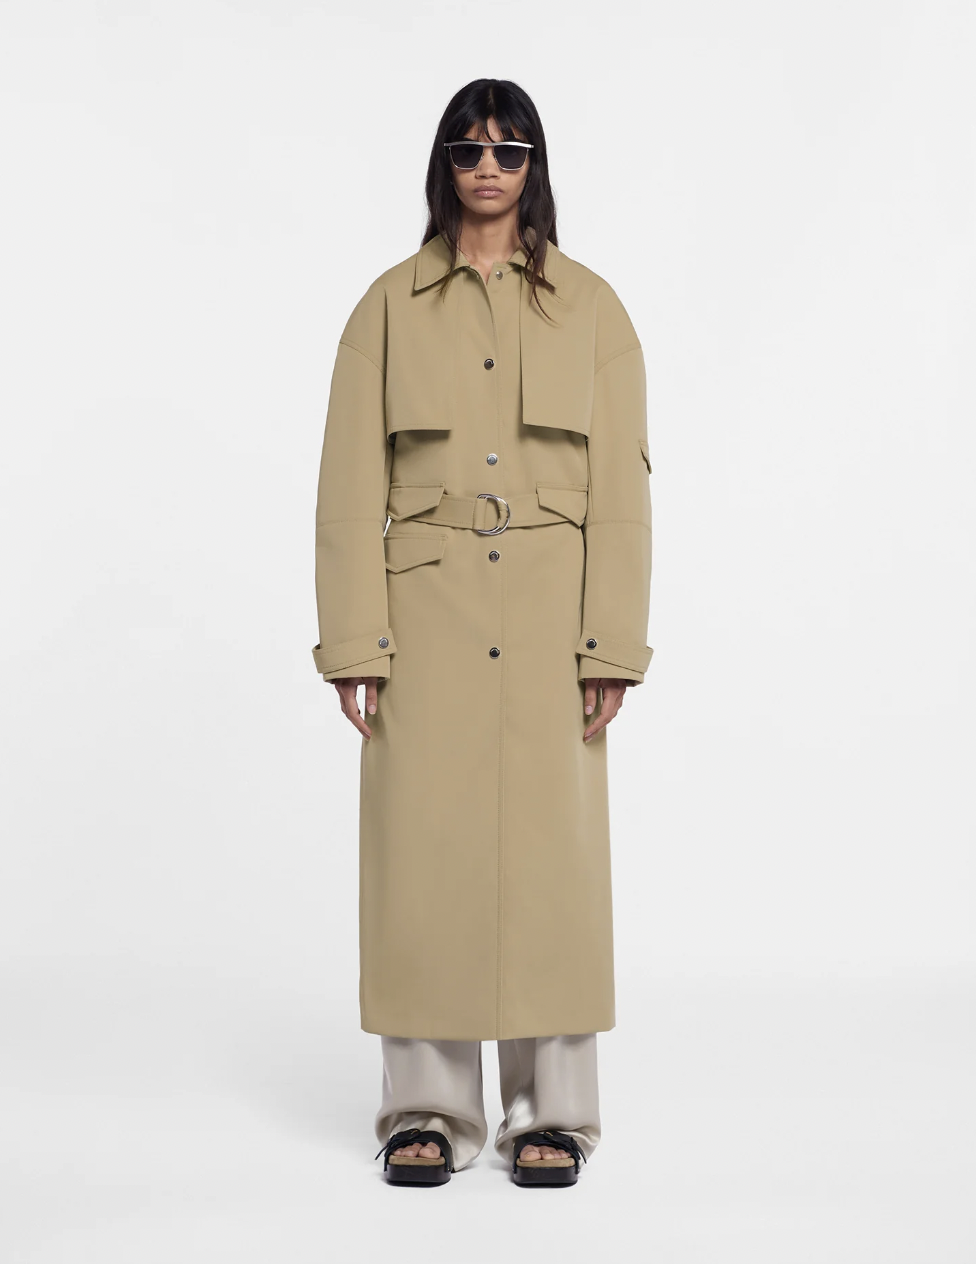 19 Stylish Trench Coats Every Fashion Girlie Needs This Fall